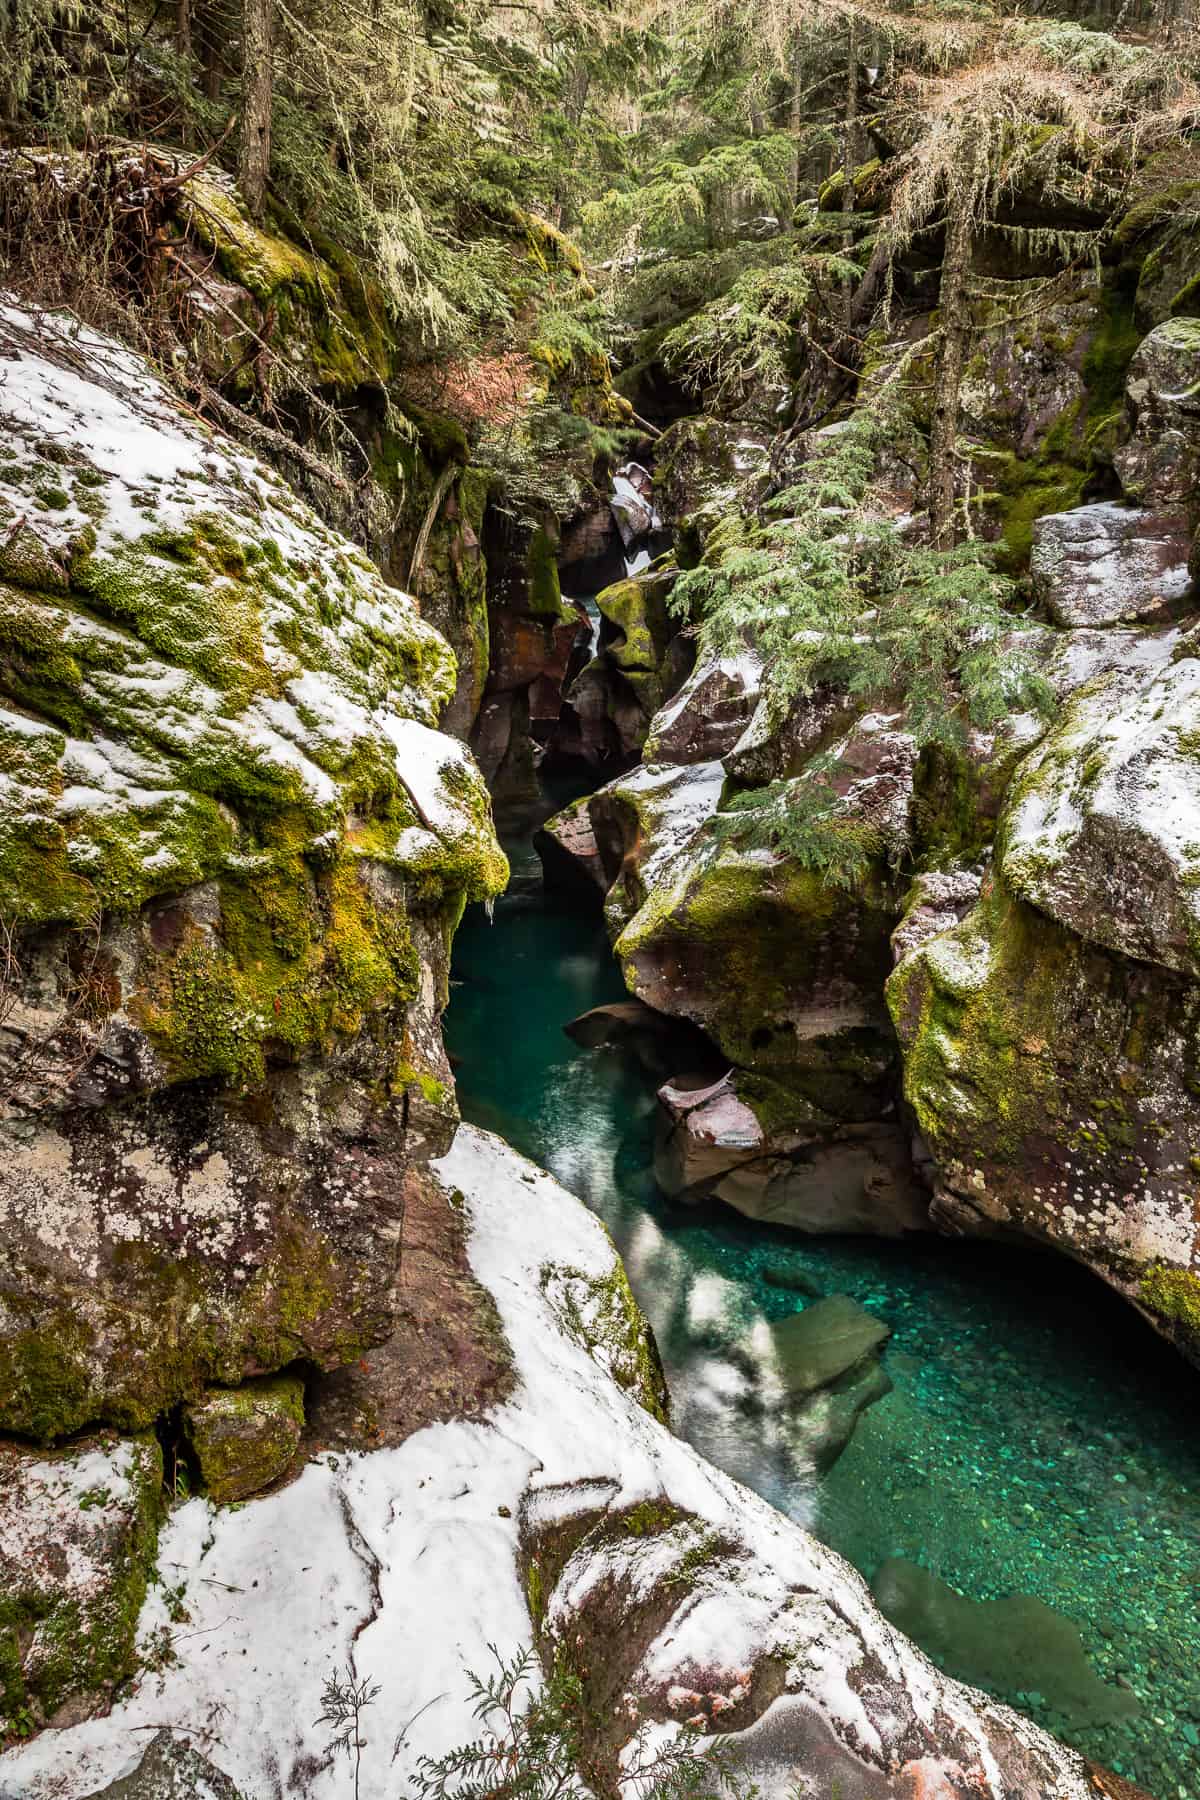 Turquoise water in a gorge with snow on the rocky sides.